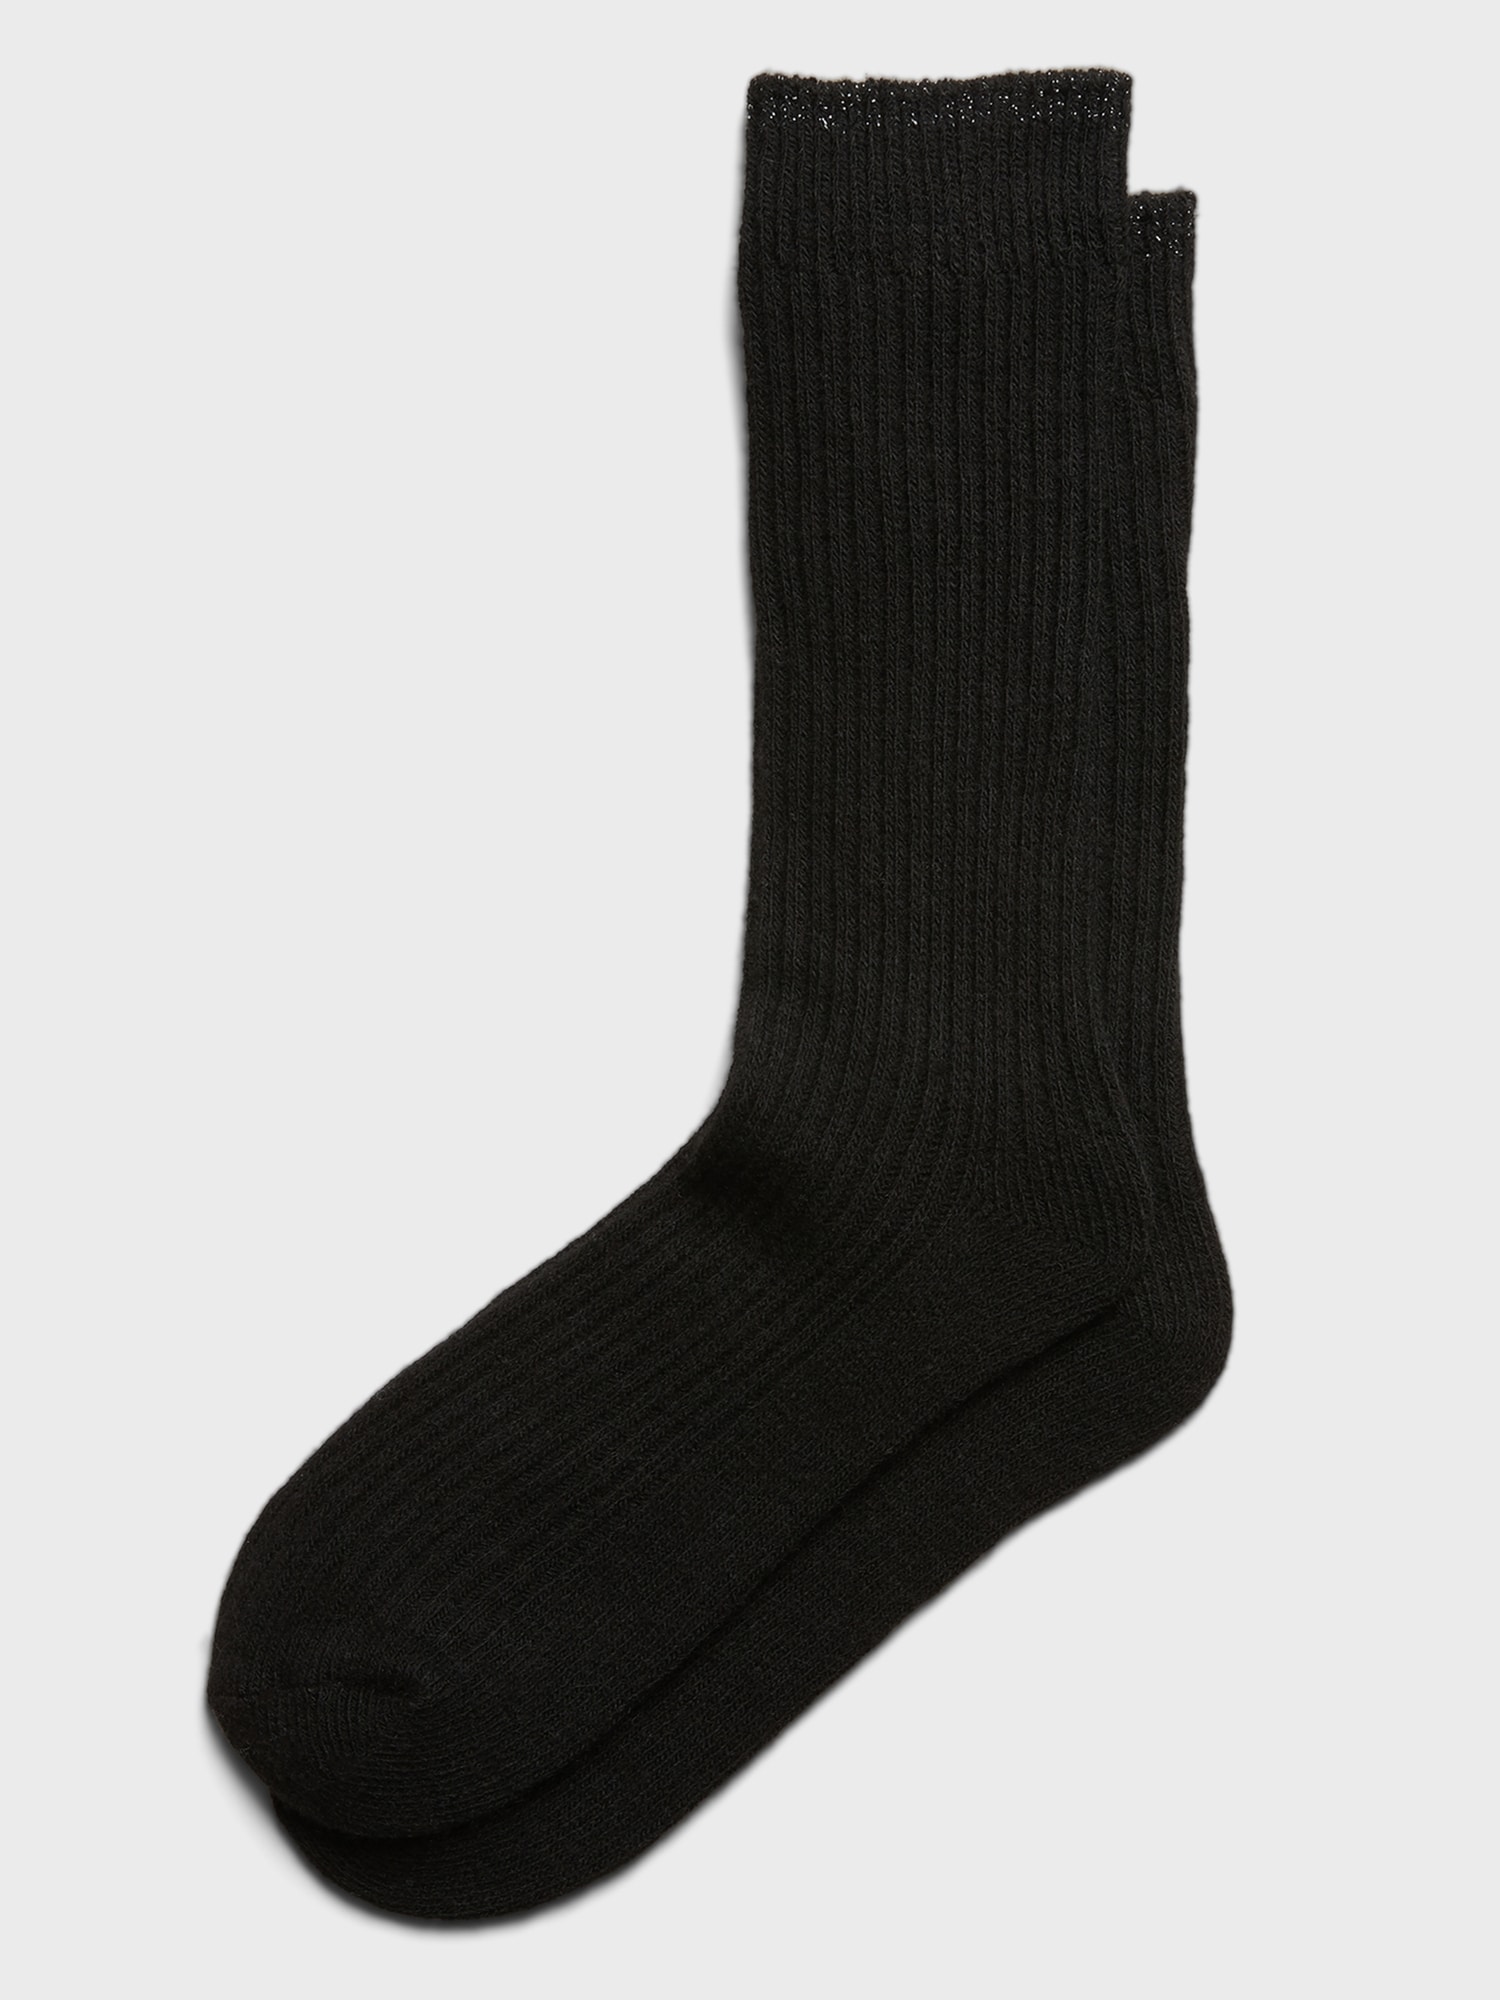 Cozy Sock with a Touch of Cashmere